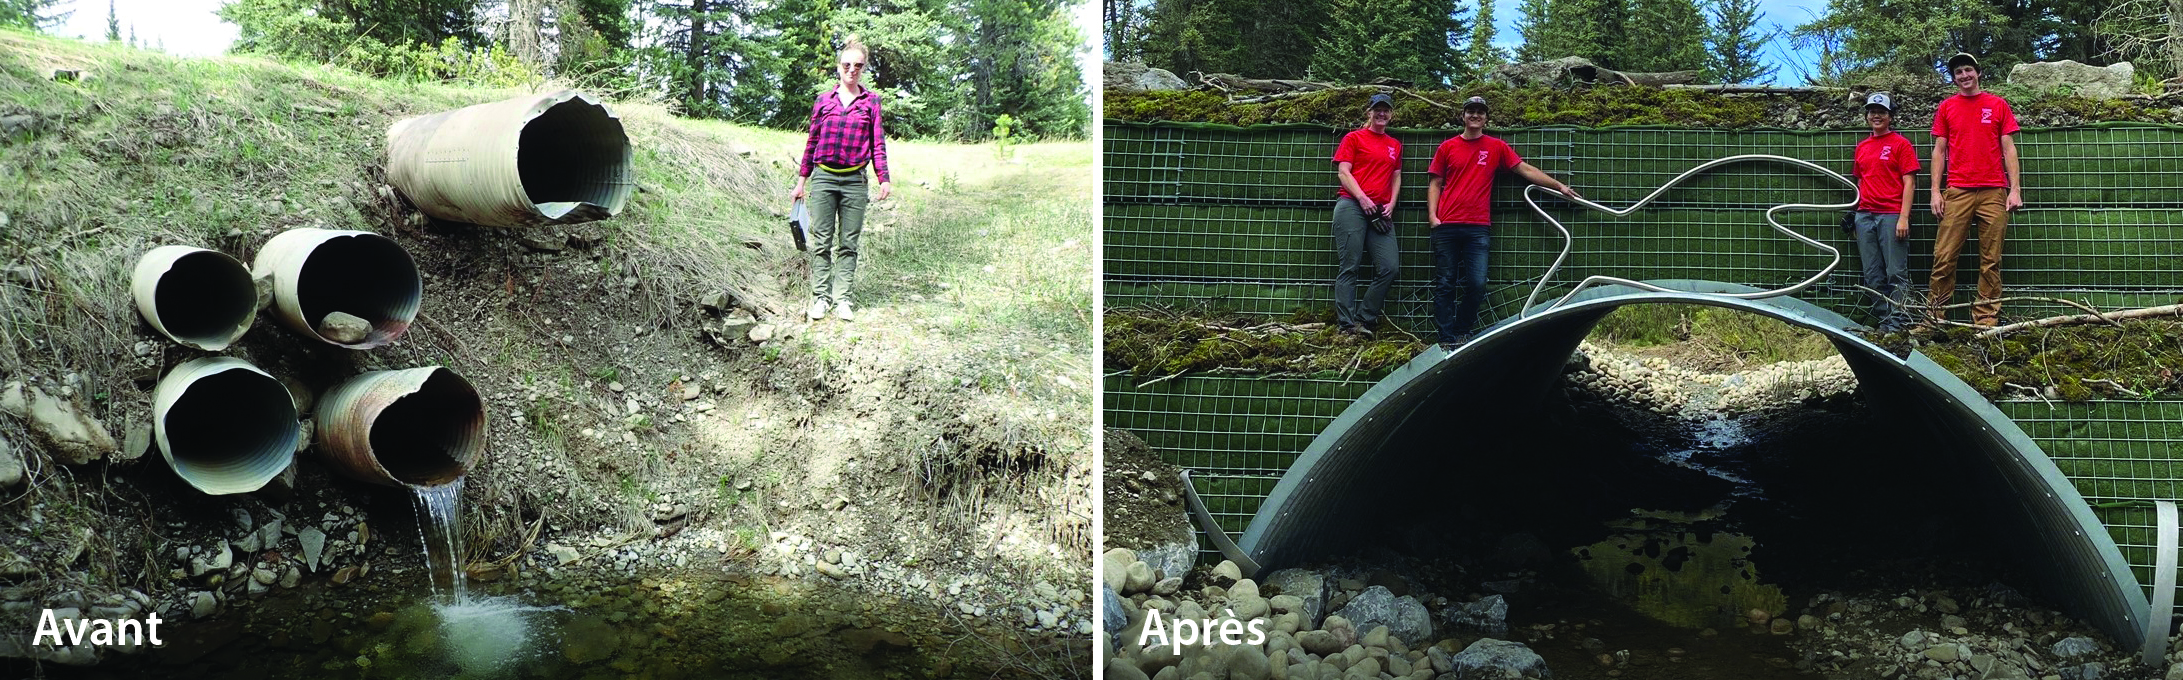 Before and after views of AIL Geotextile Reinforced Soil (GRS) Bridge